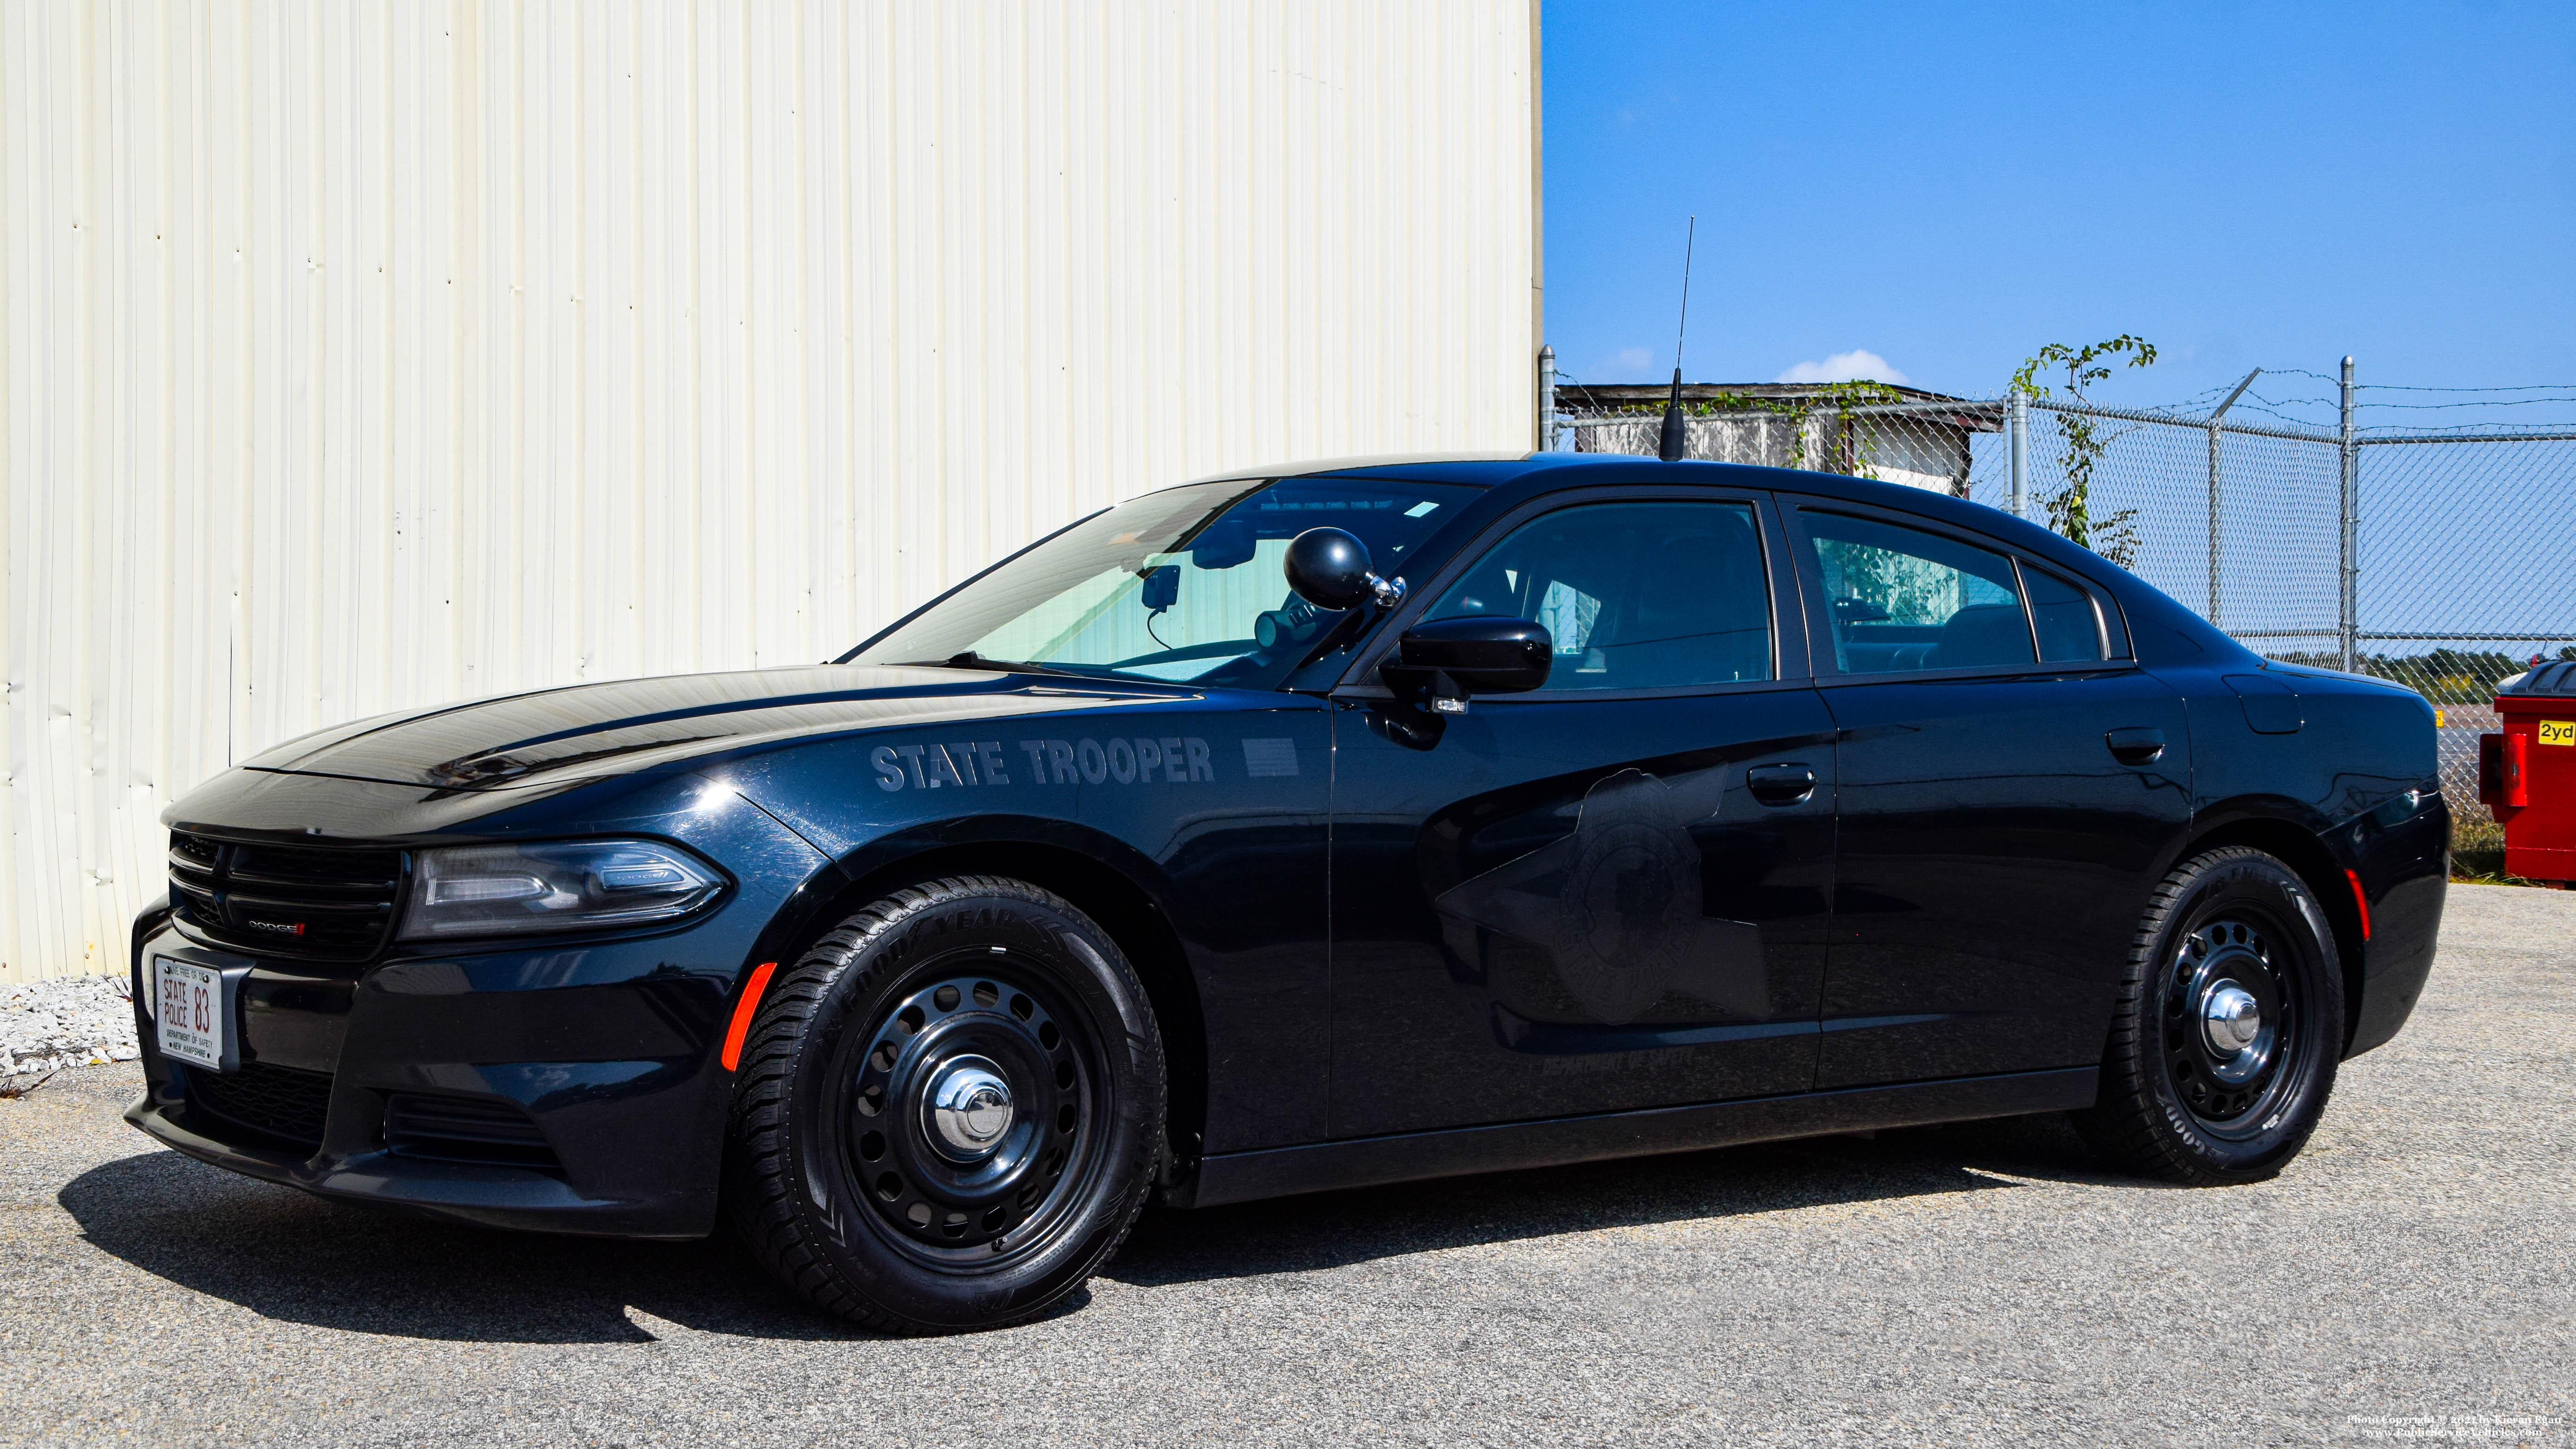 A photo  of New Hampshire State Police
            Cruiser 83, a 2017-2019 Dodge Charger             taken by Kieran Egan